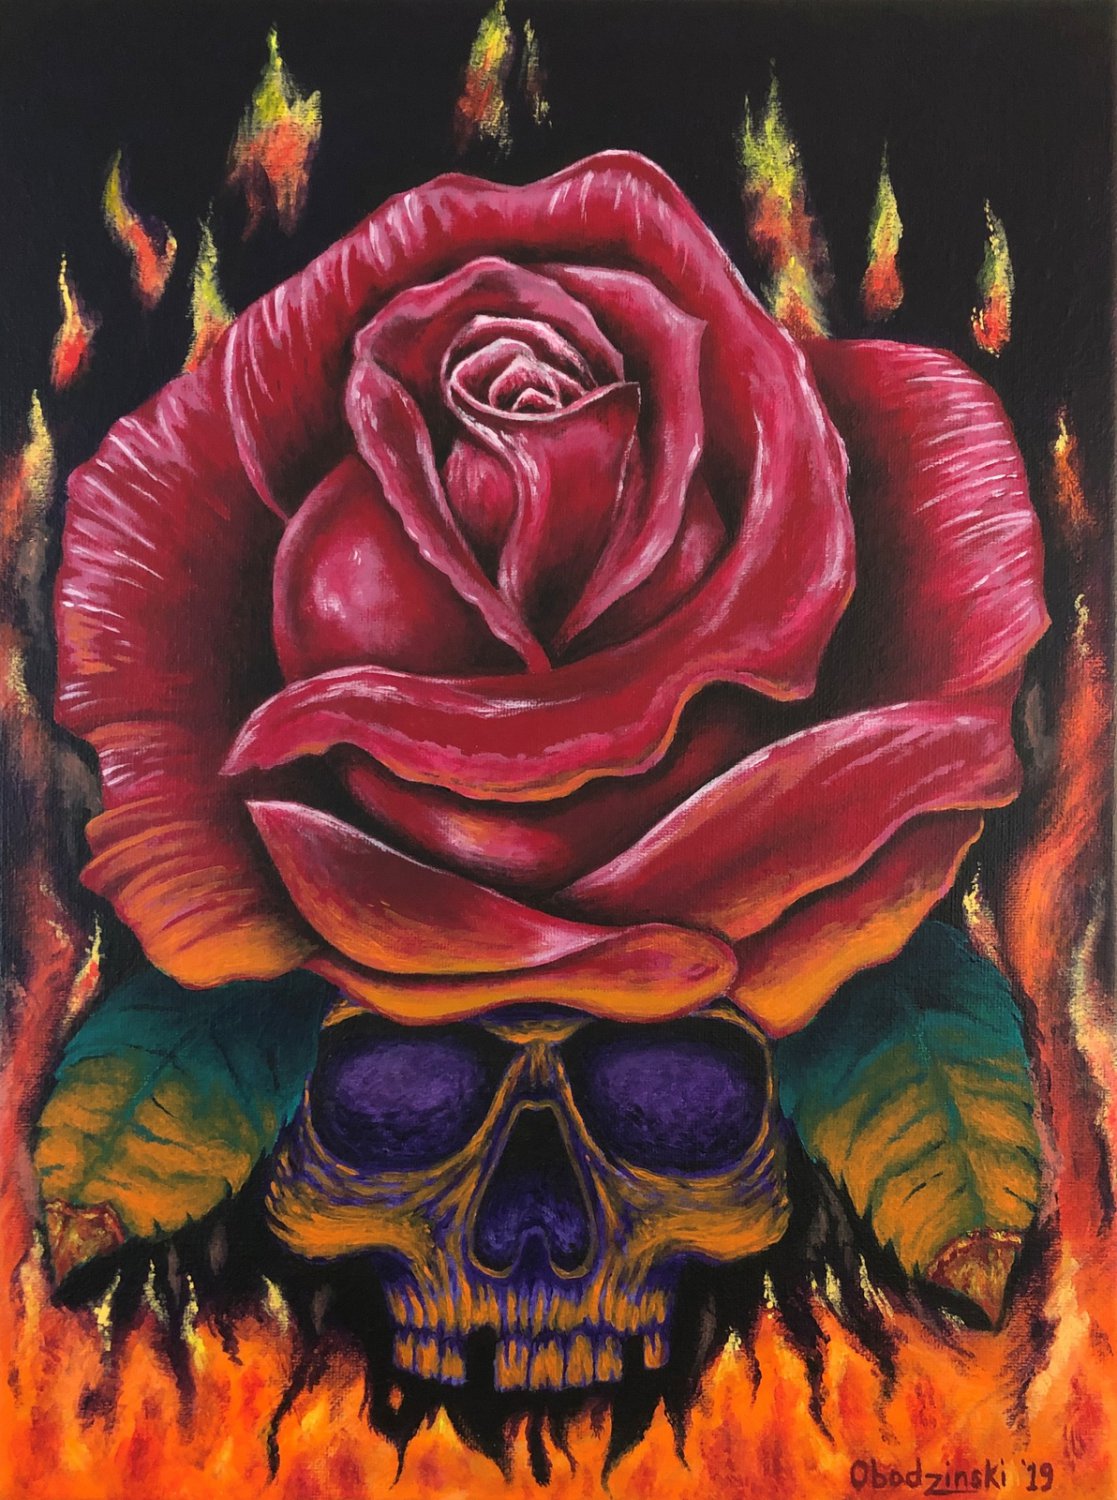 "Up in Flames' Skull and Red Rose in Flames Artwork Poster Print by Gregg's Deep Colors